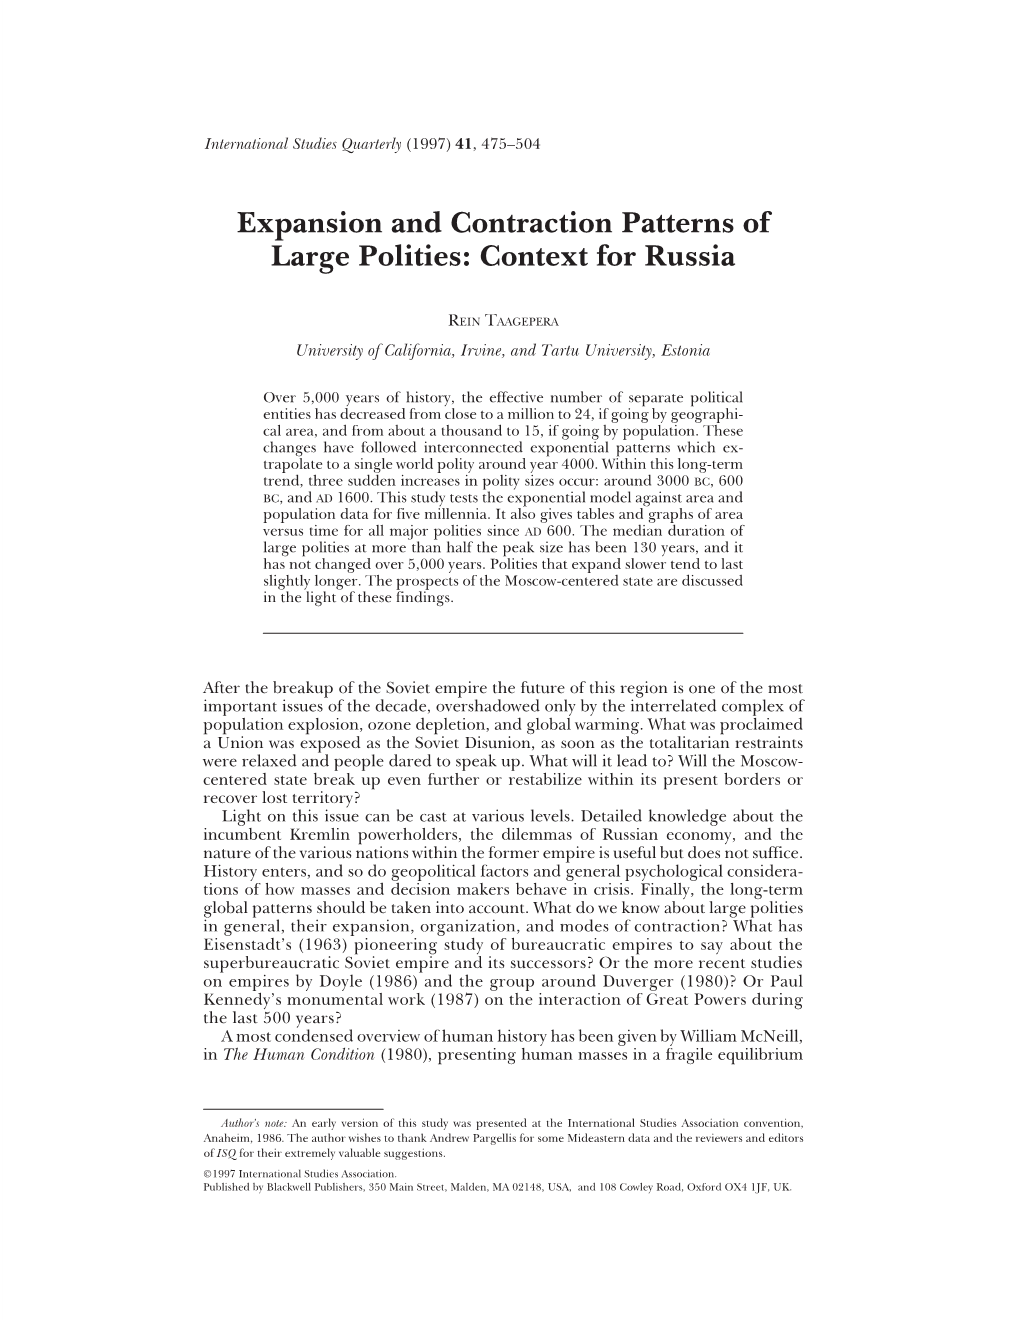 Expansion and Contraction Patterns of Large Polities: Context for Russia